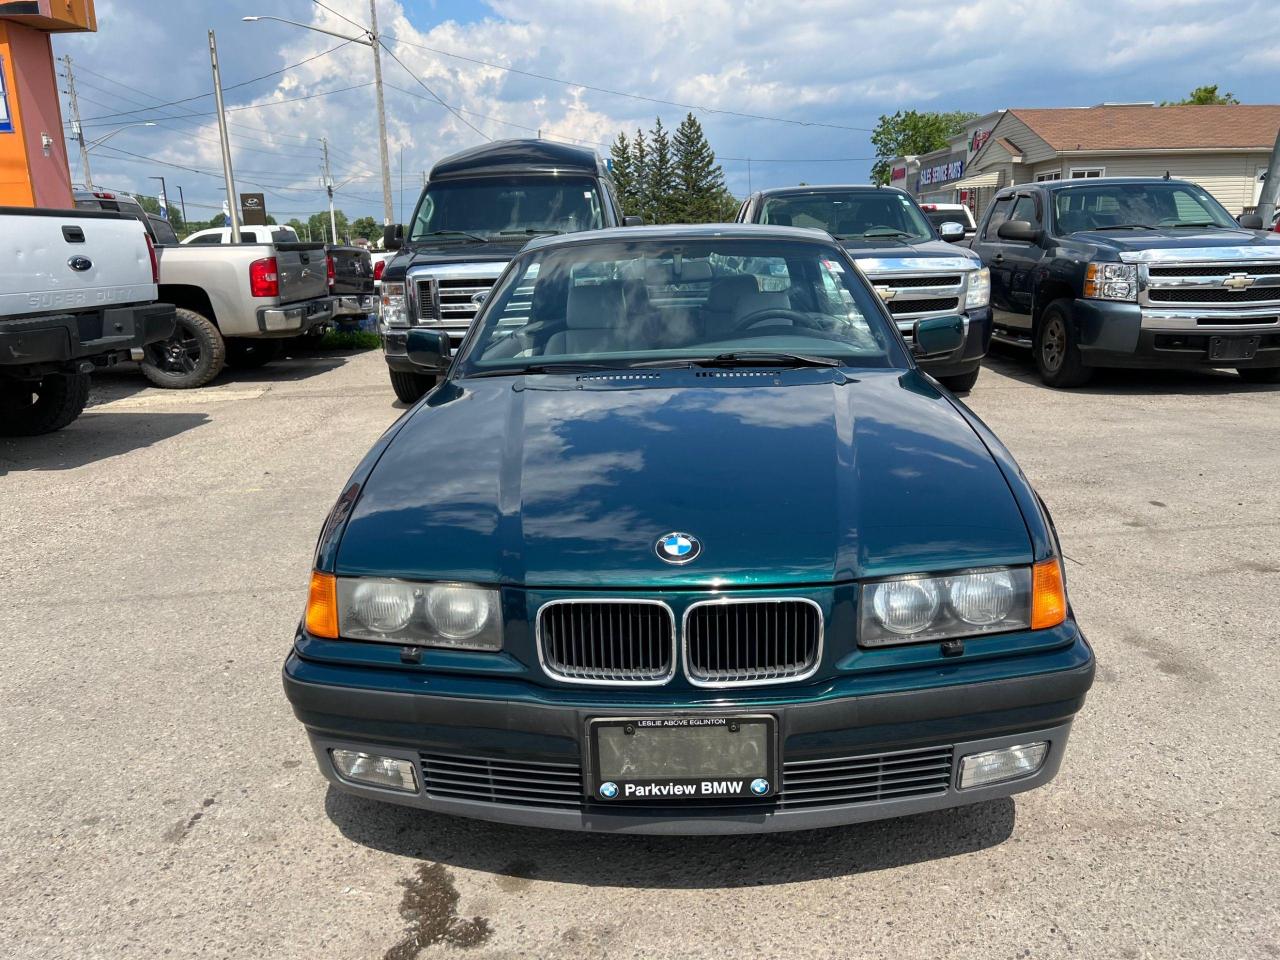 1995 BMW 325i CONVERTIBLE*MINT*HARDTOP*ONLY 133KMS*CERTIFIED - Photo #8